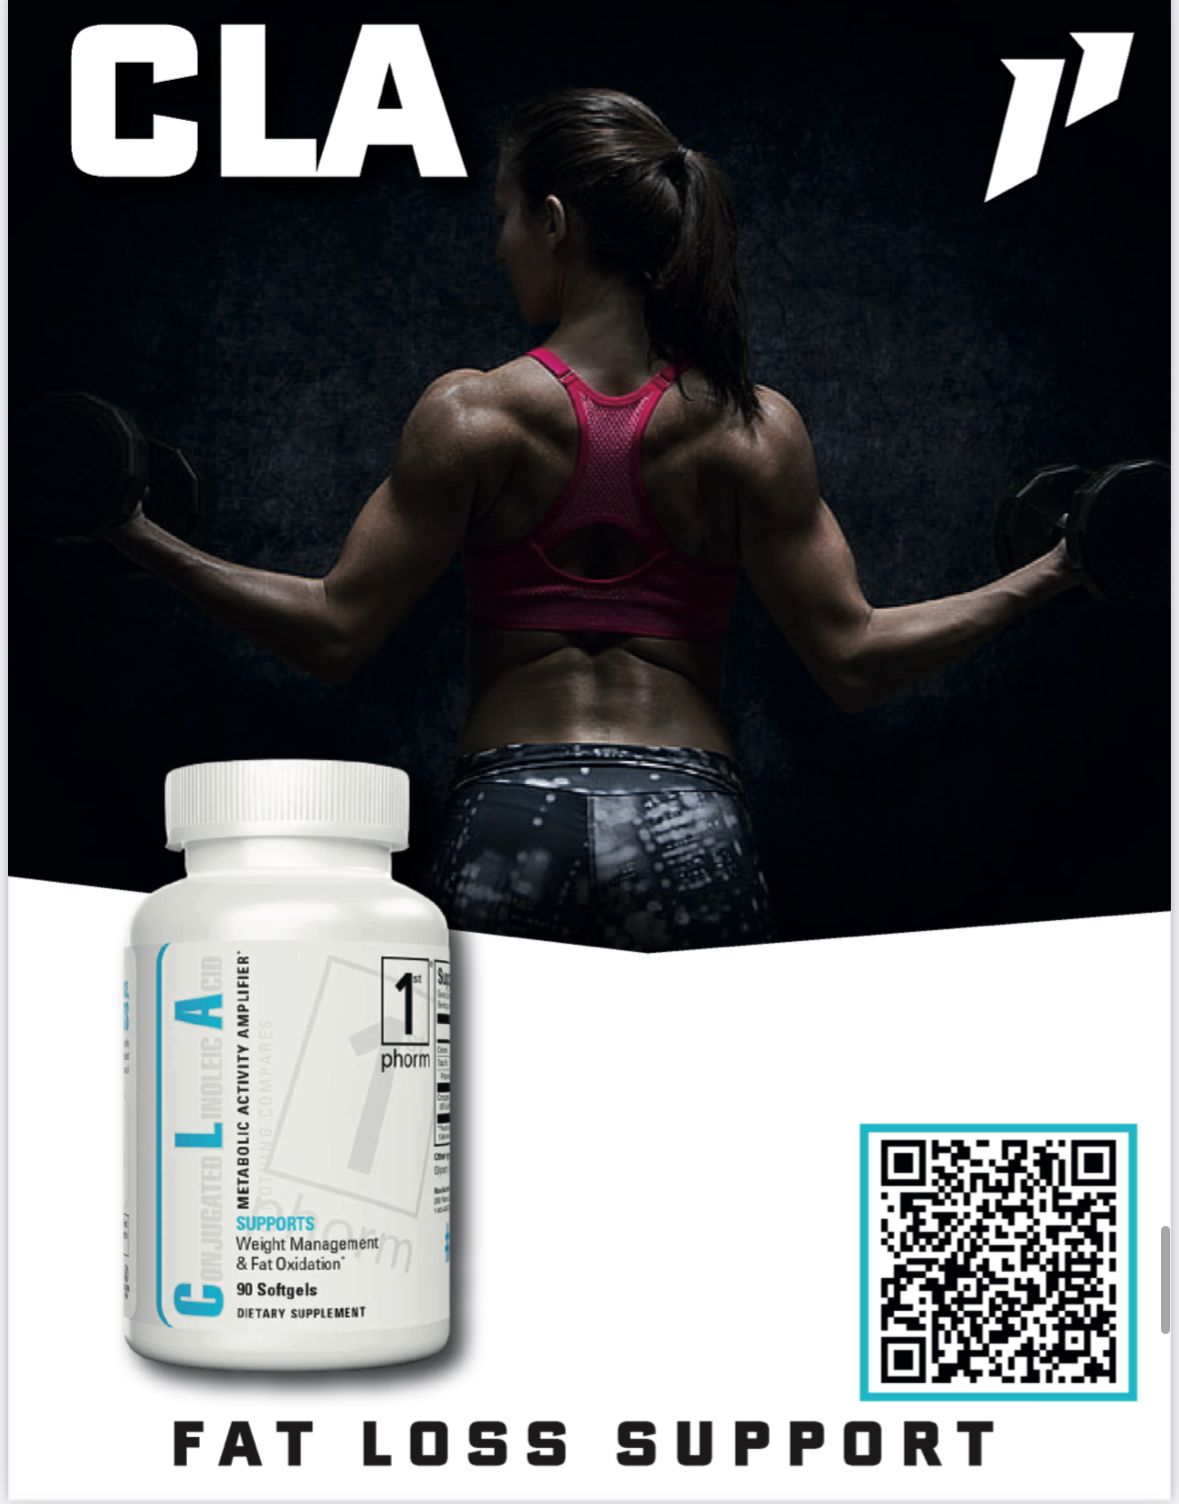 Cla Supplement - The Bronx, NY - Erector Masters